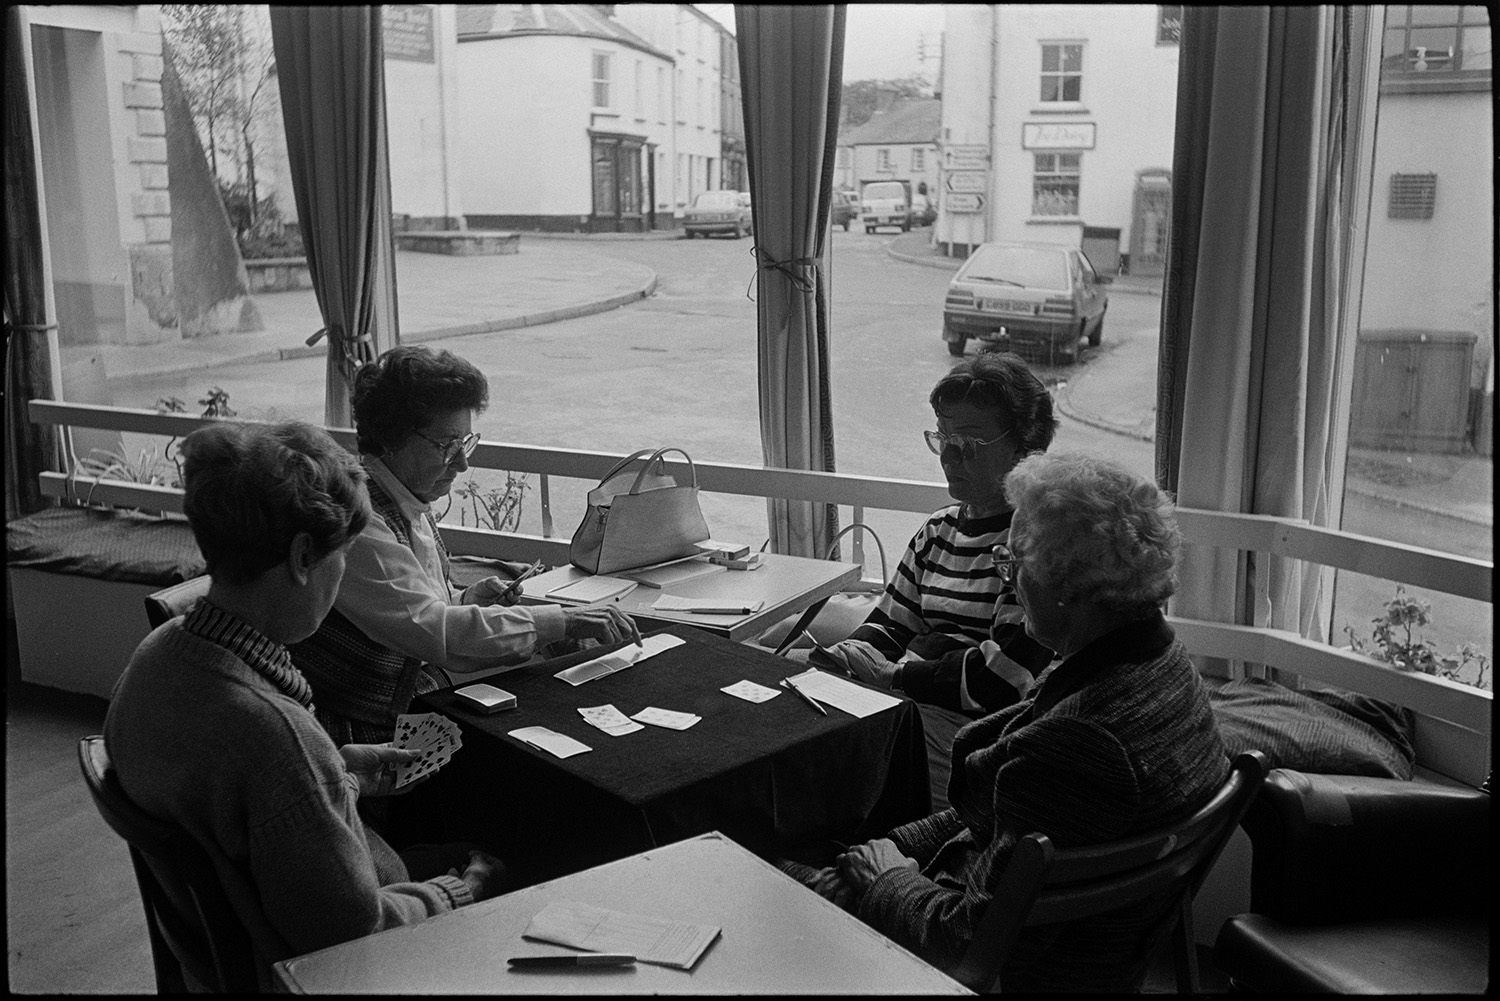 Women playing cards in social club, 61 centre. 
[Four women playing cards at a table in the 61 Centre in Chulmleigh. A street can be seen outside with parked cars and shop fronts.]